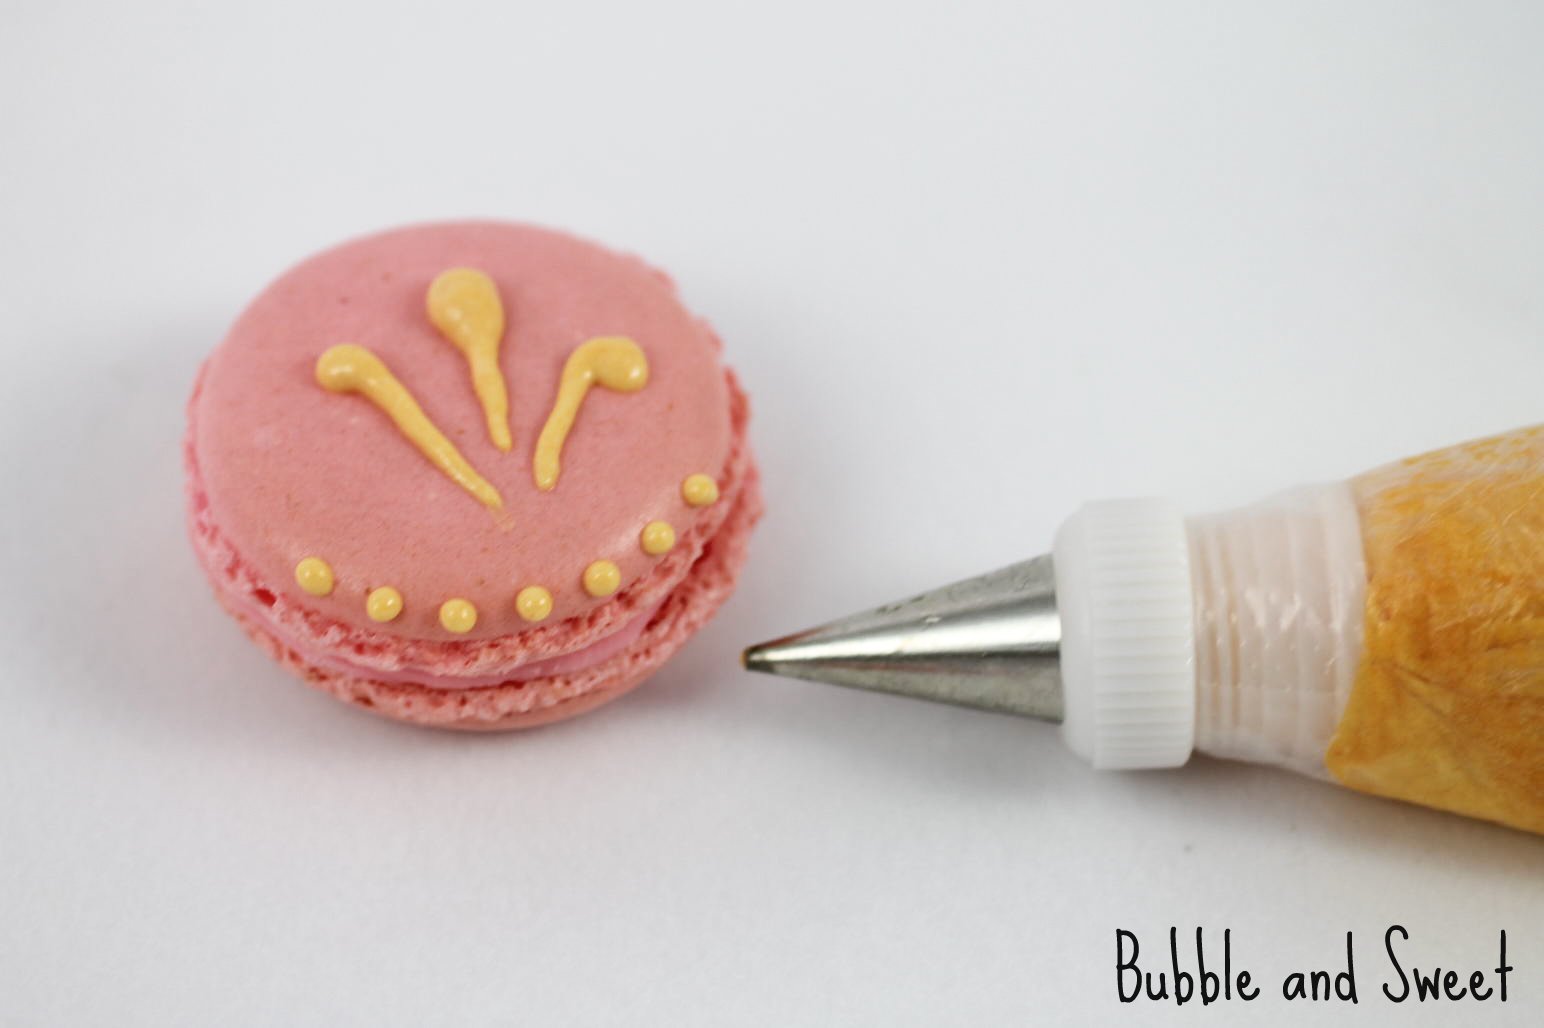 How to Decorate Macarons With Gold Dust - Parties With A Cause